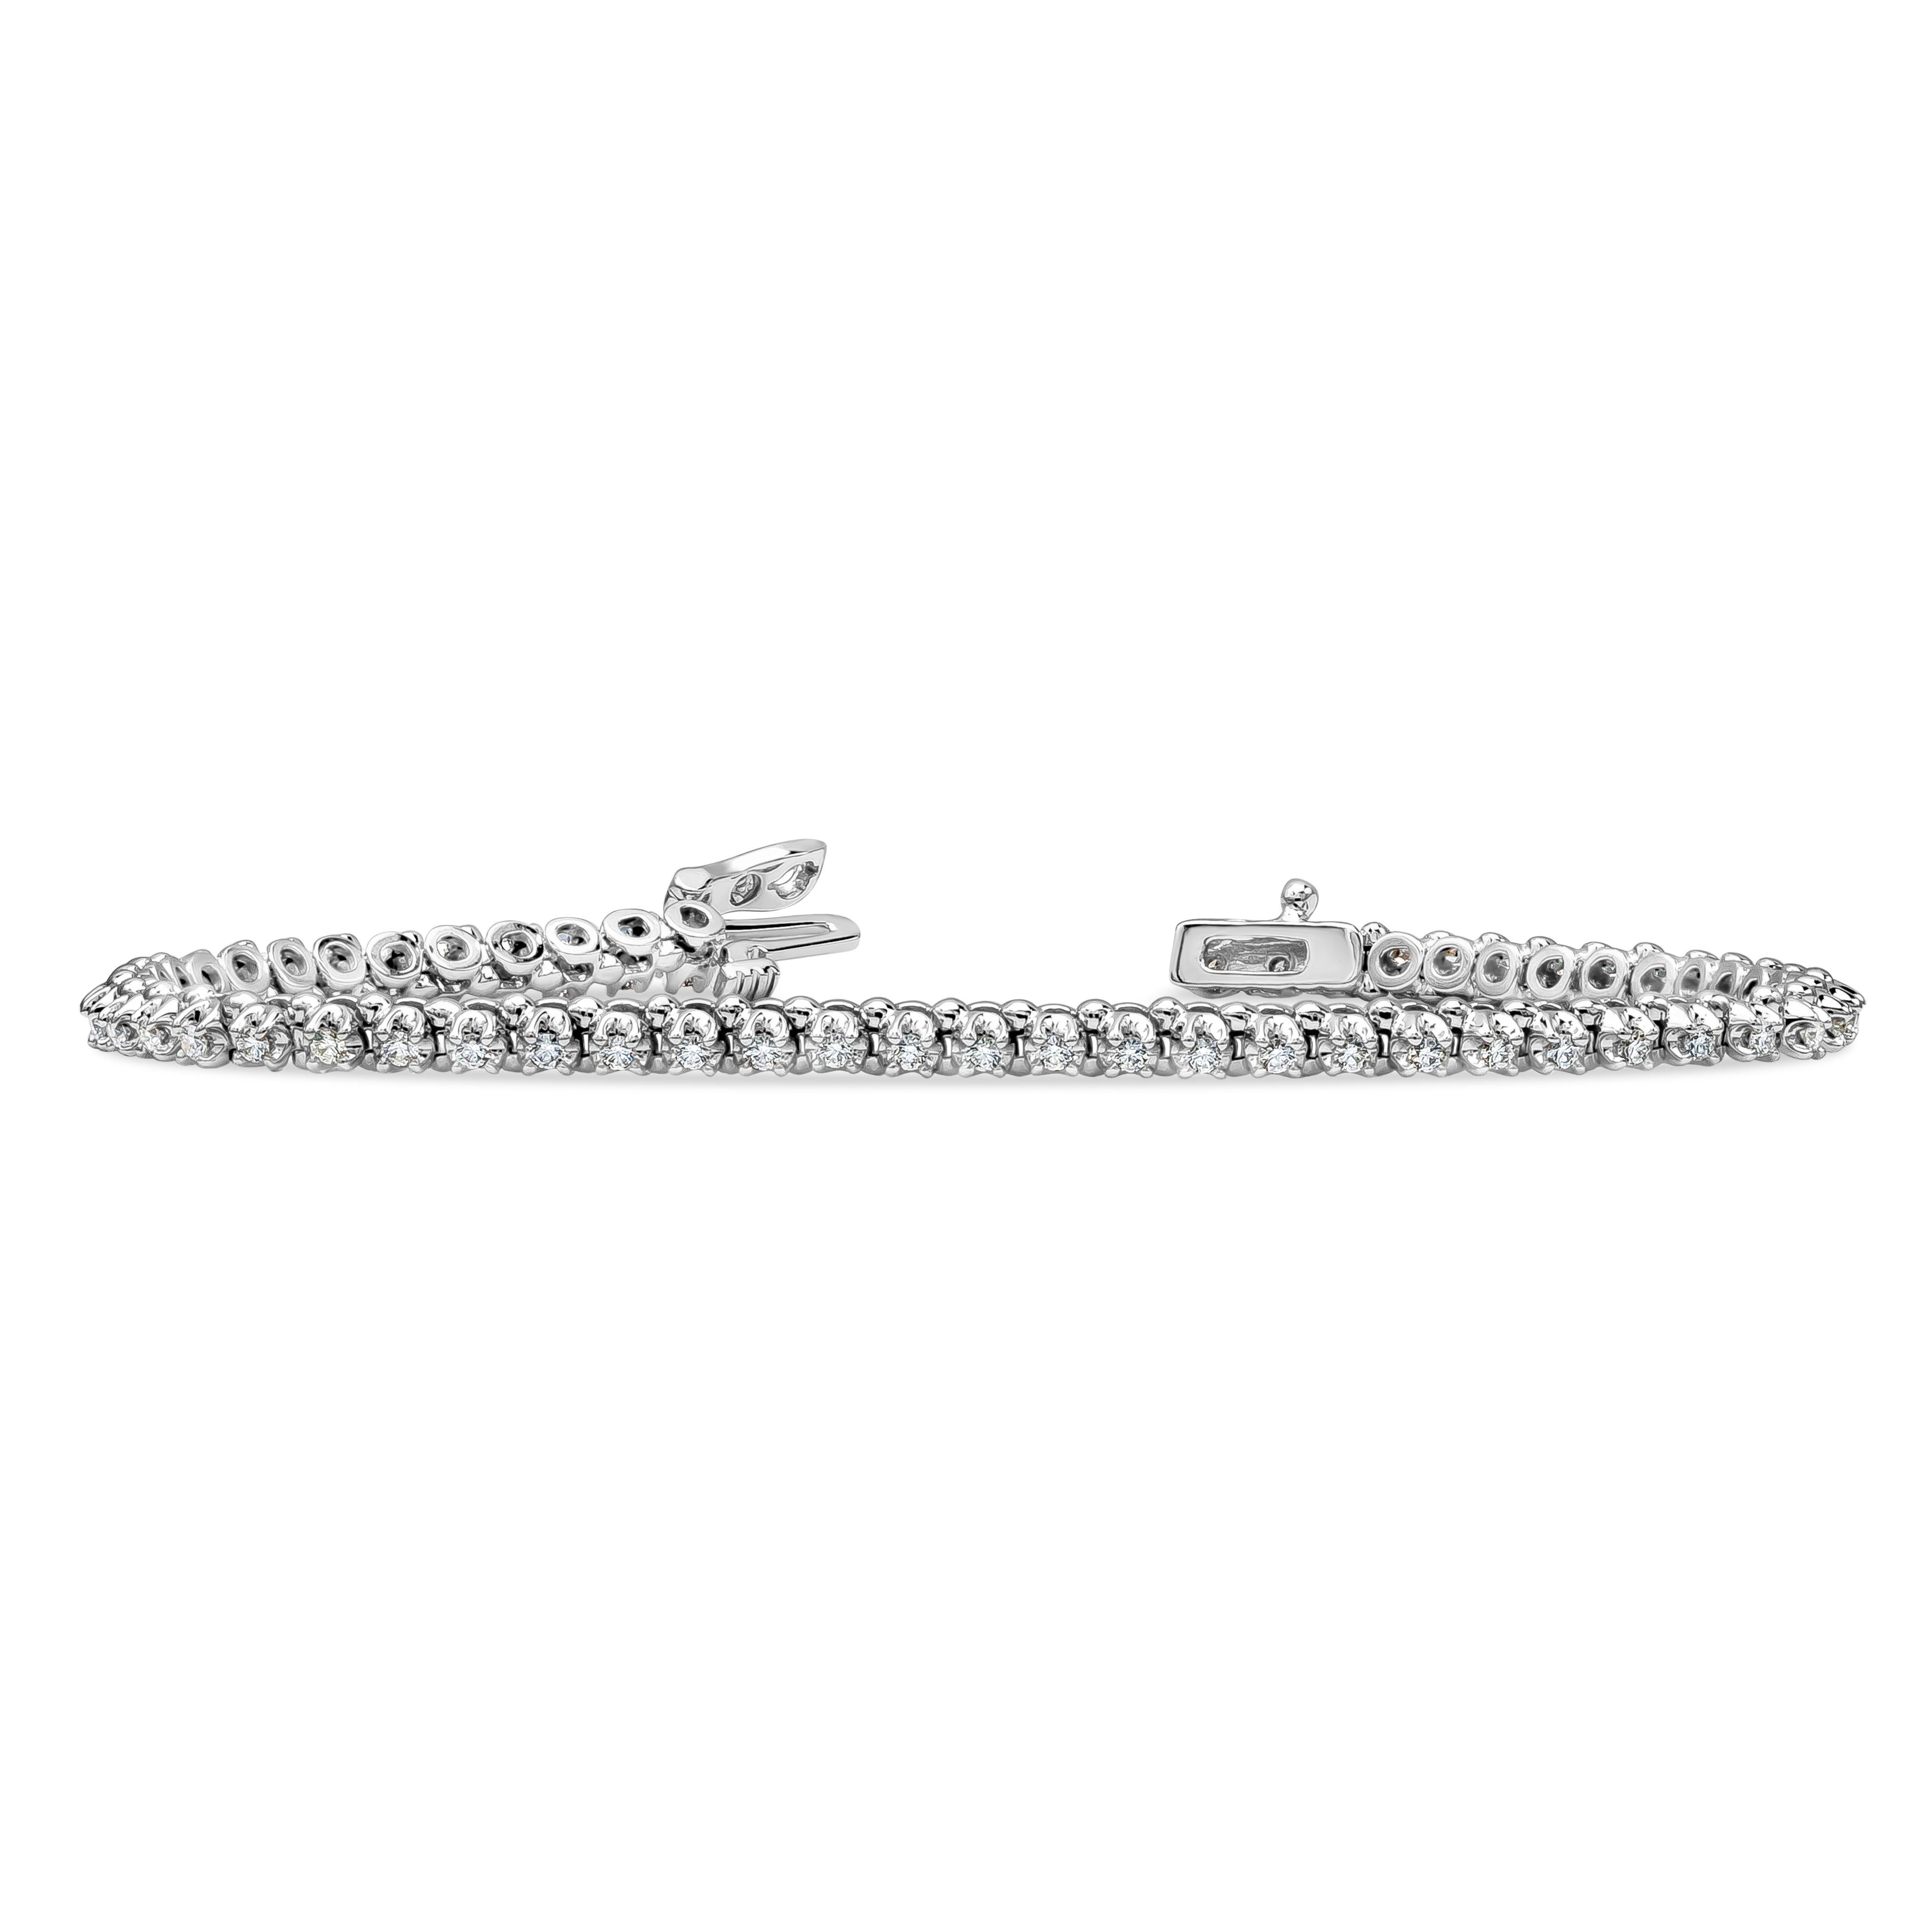 A classic tennis bracelet style, showcasing 56 round brilliant cut diamonds weighing 0.88 carats total with F color and VS2 clarity. Set on 14K white gold, 1.50 mm in width and 7 inches in length.

Roman Malakov is a custom house, specializing in